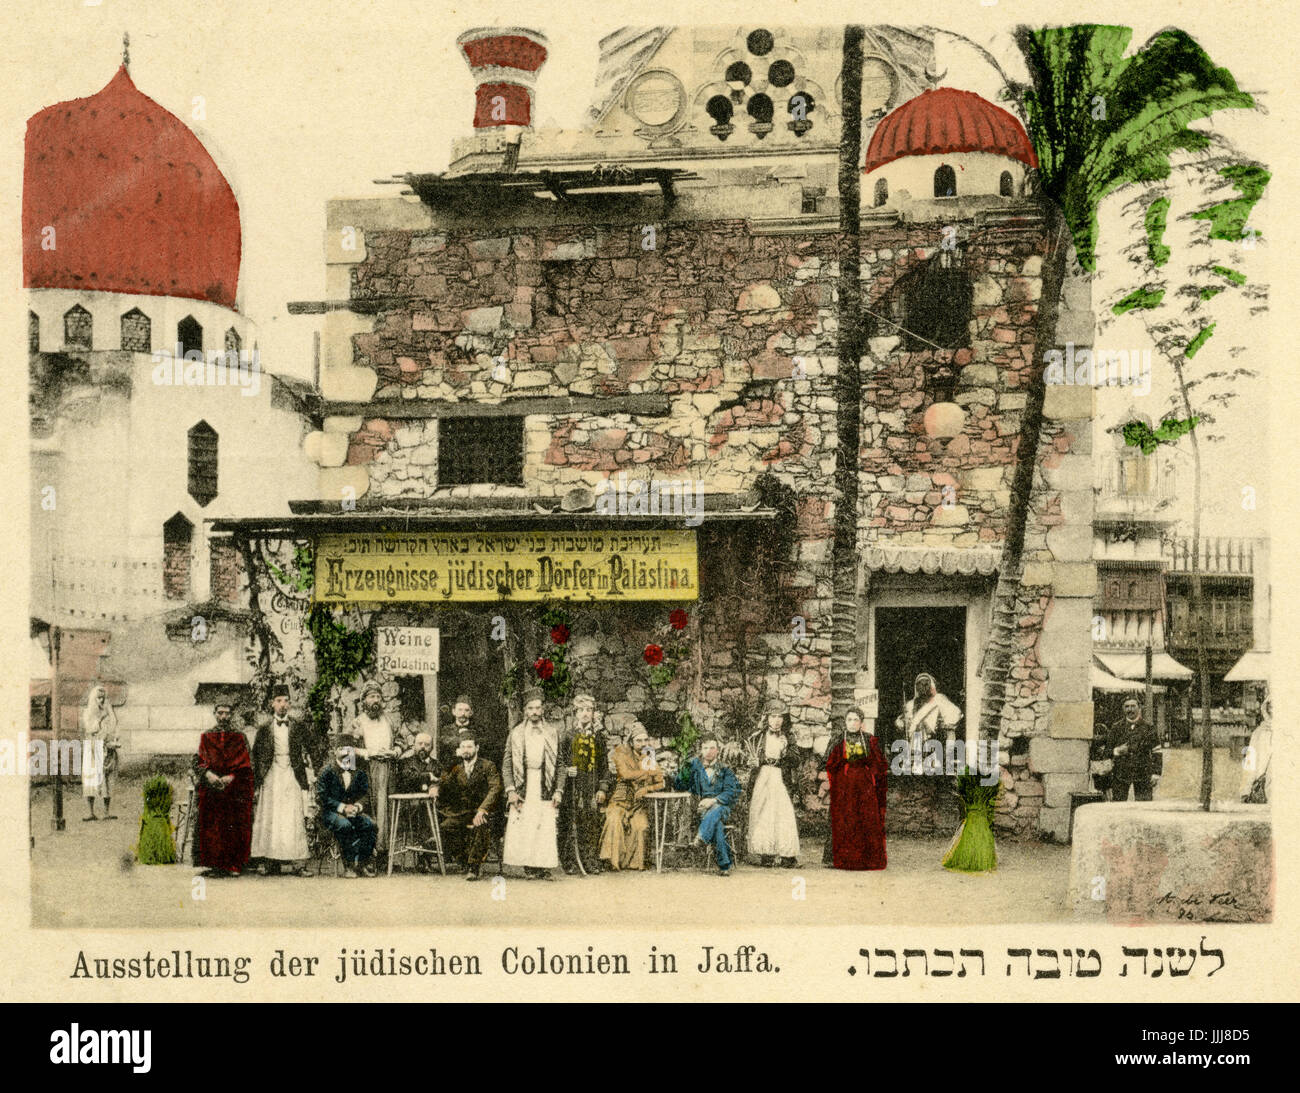 Jewish colonies of Jaffa, early 20th century. New year greetings card. Stock Photo